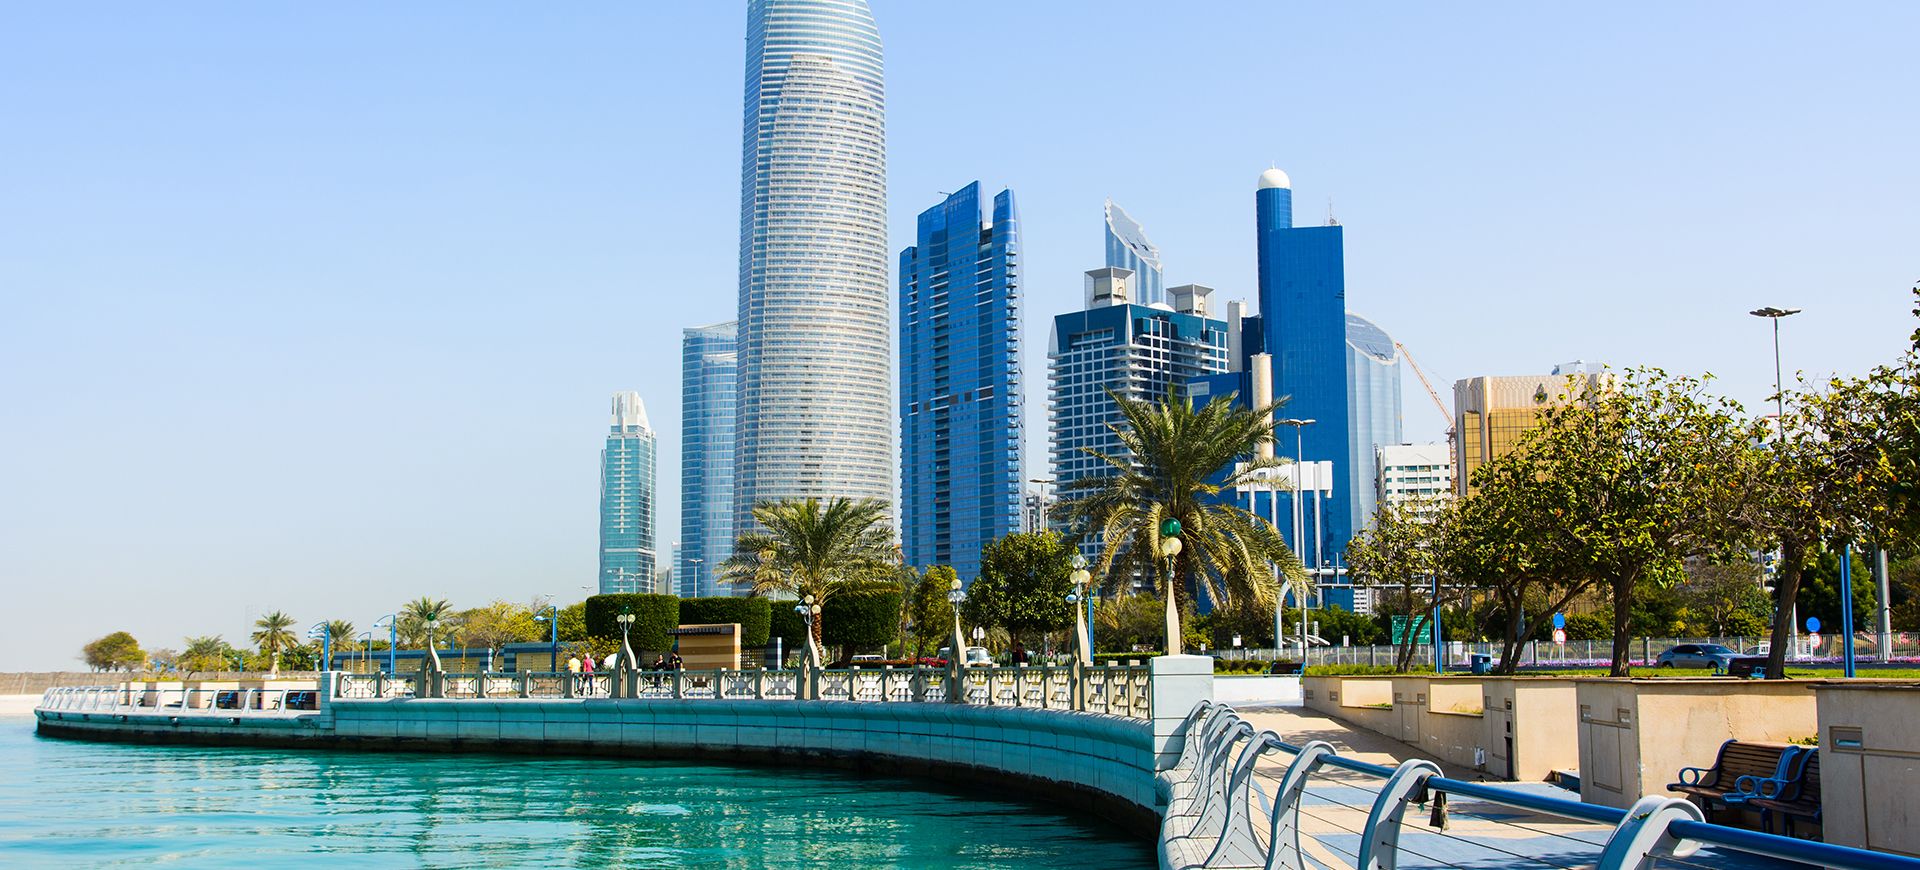 Abu Dhabi Travel Guide Best At Travel The Edit 